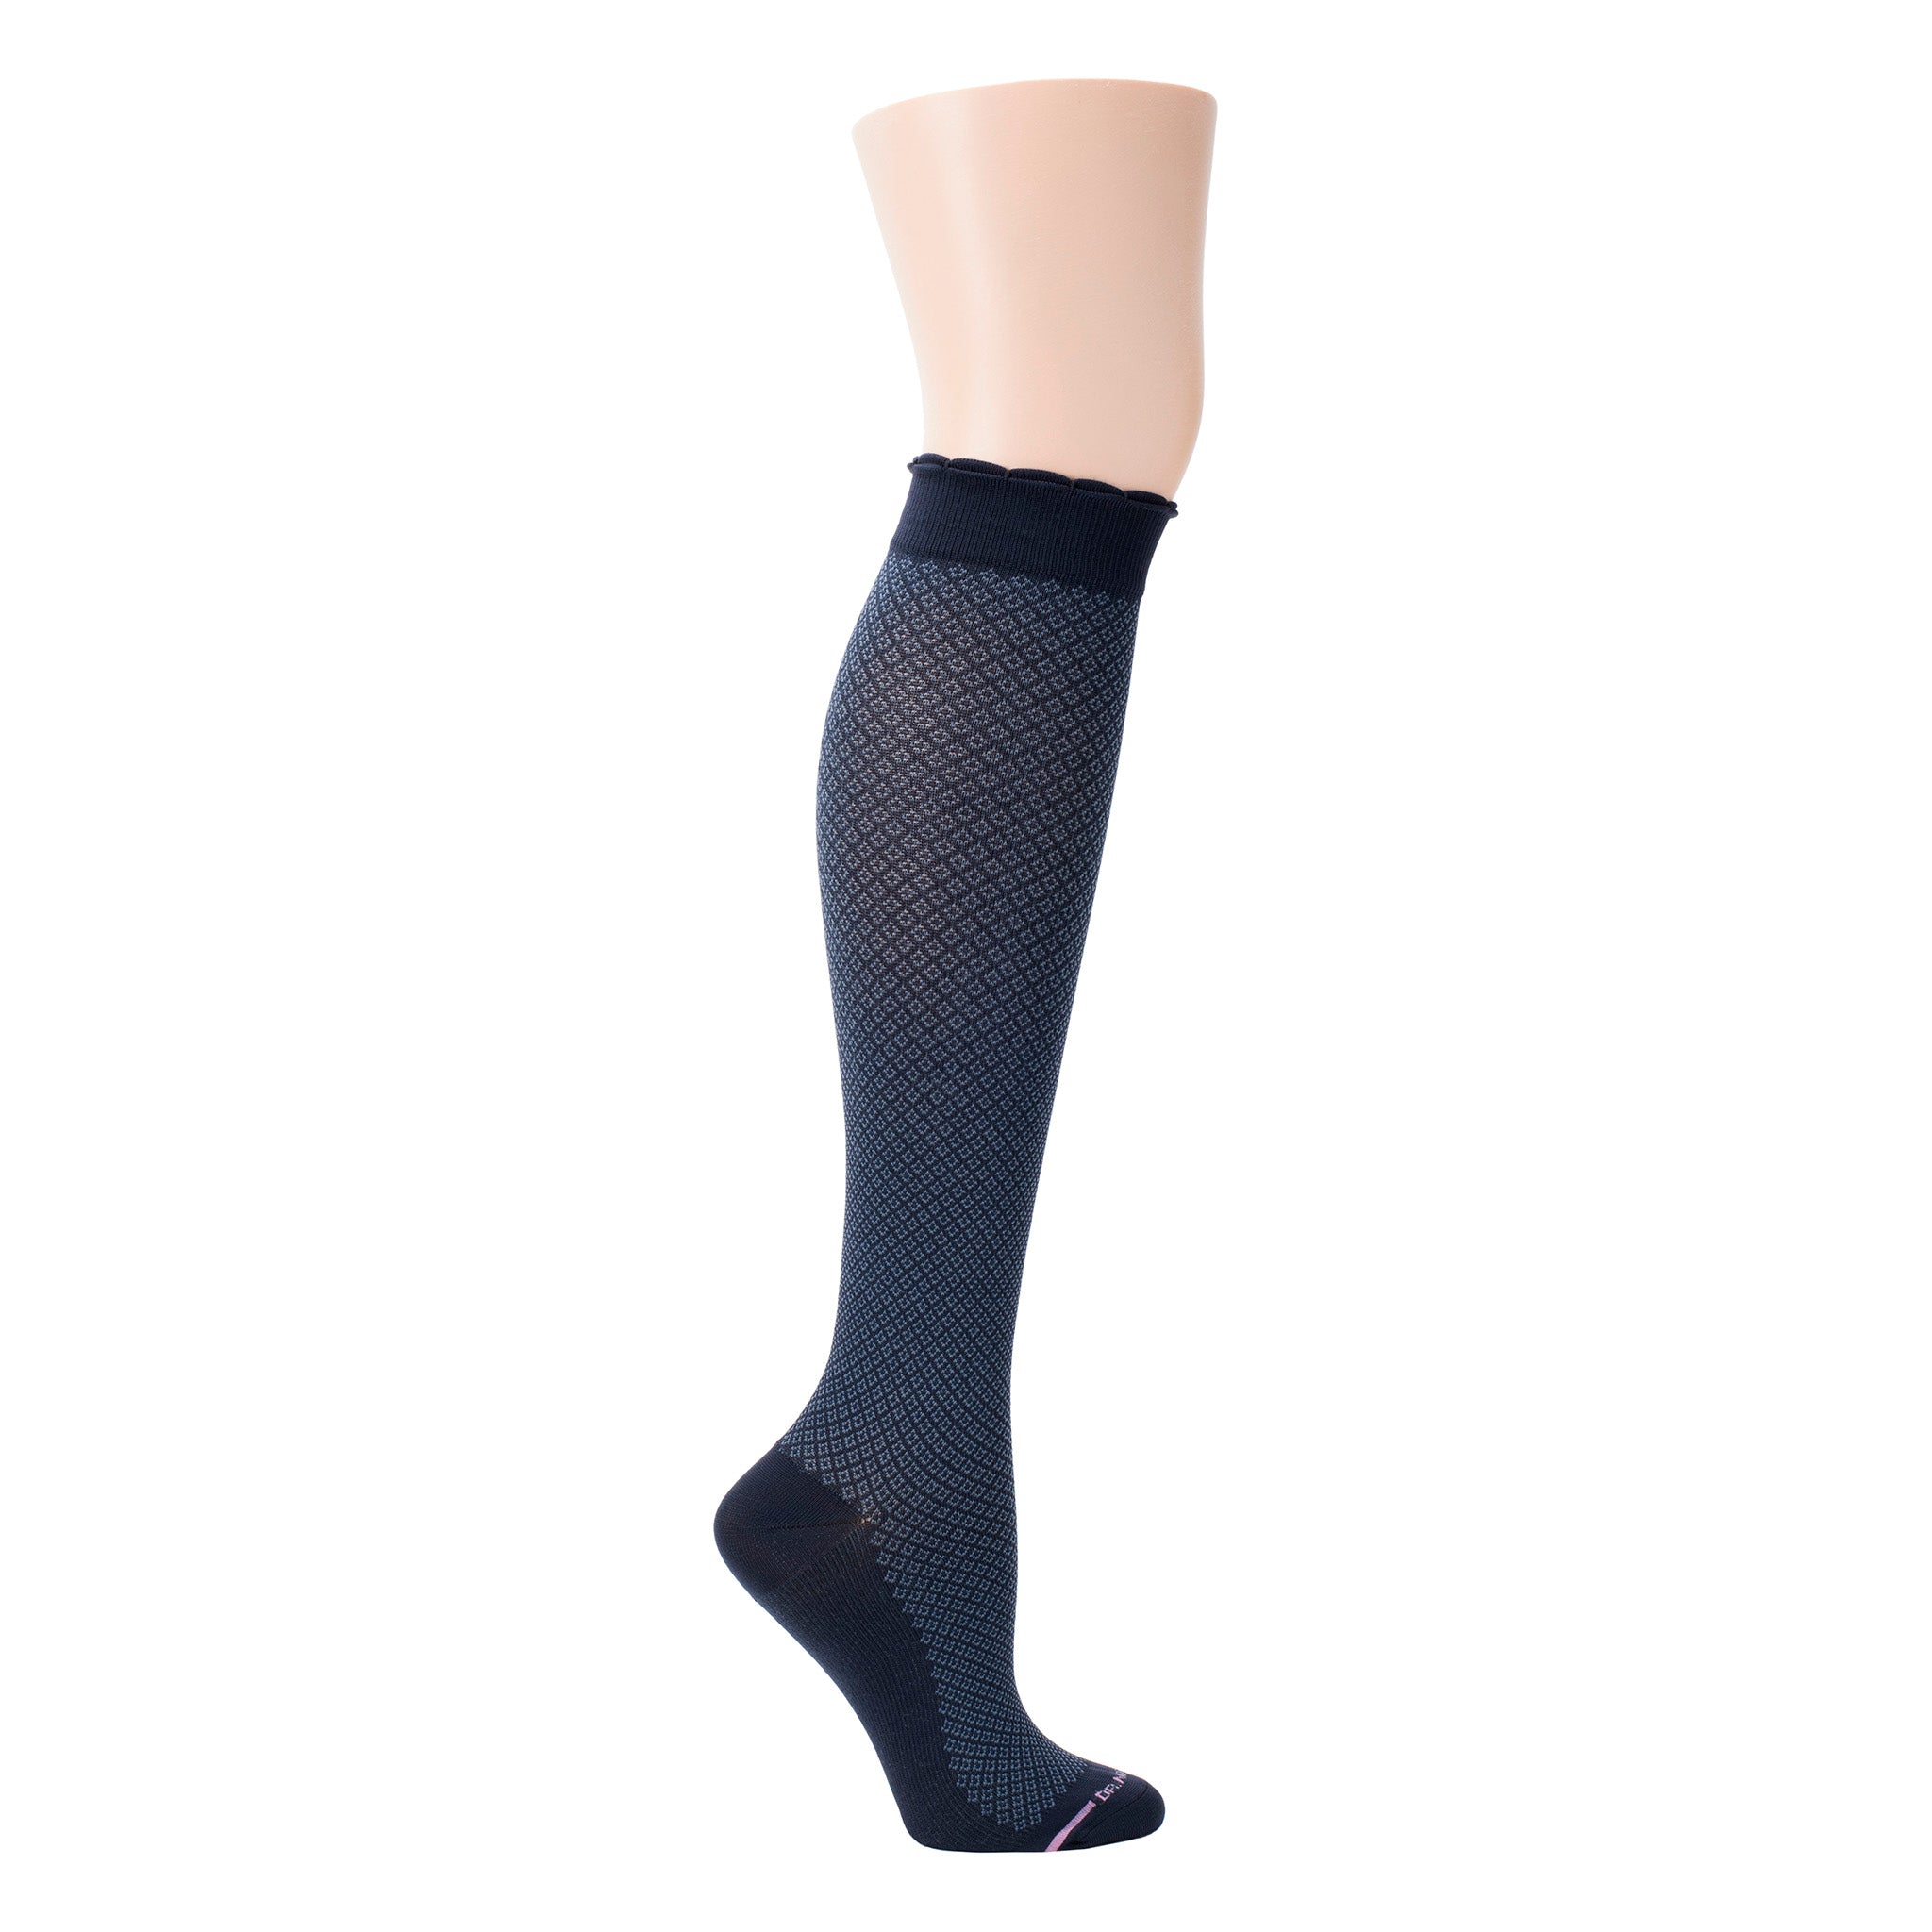 Neat Plaiting | Knee-High Compression Socks For Women